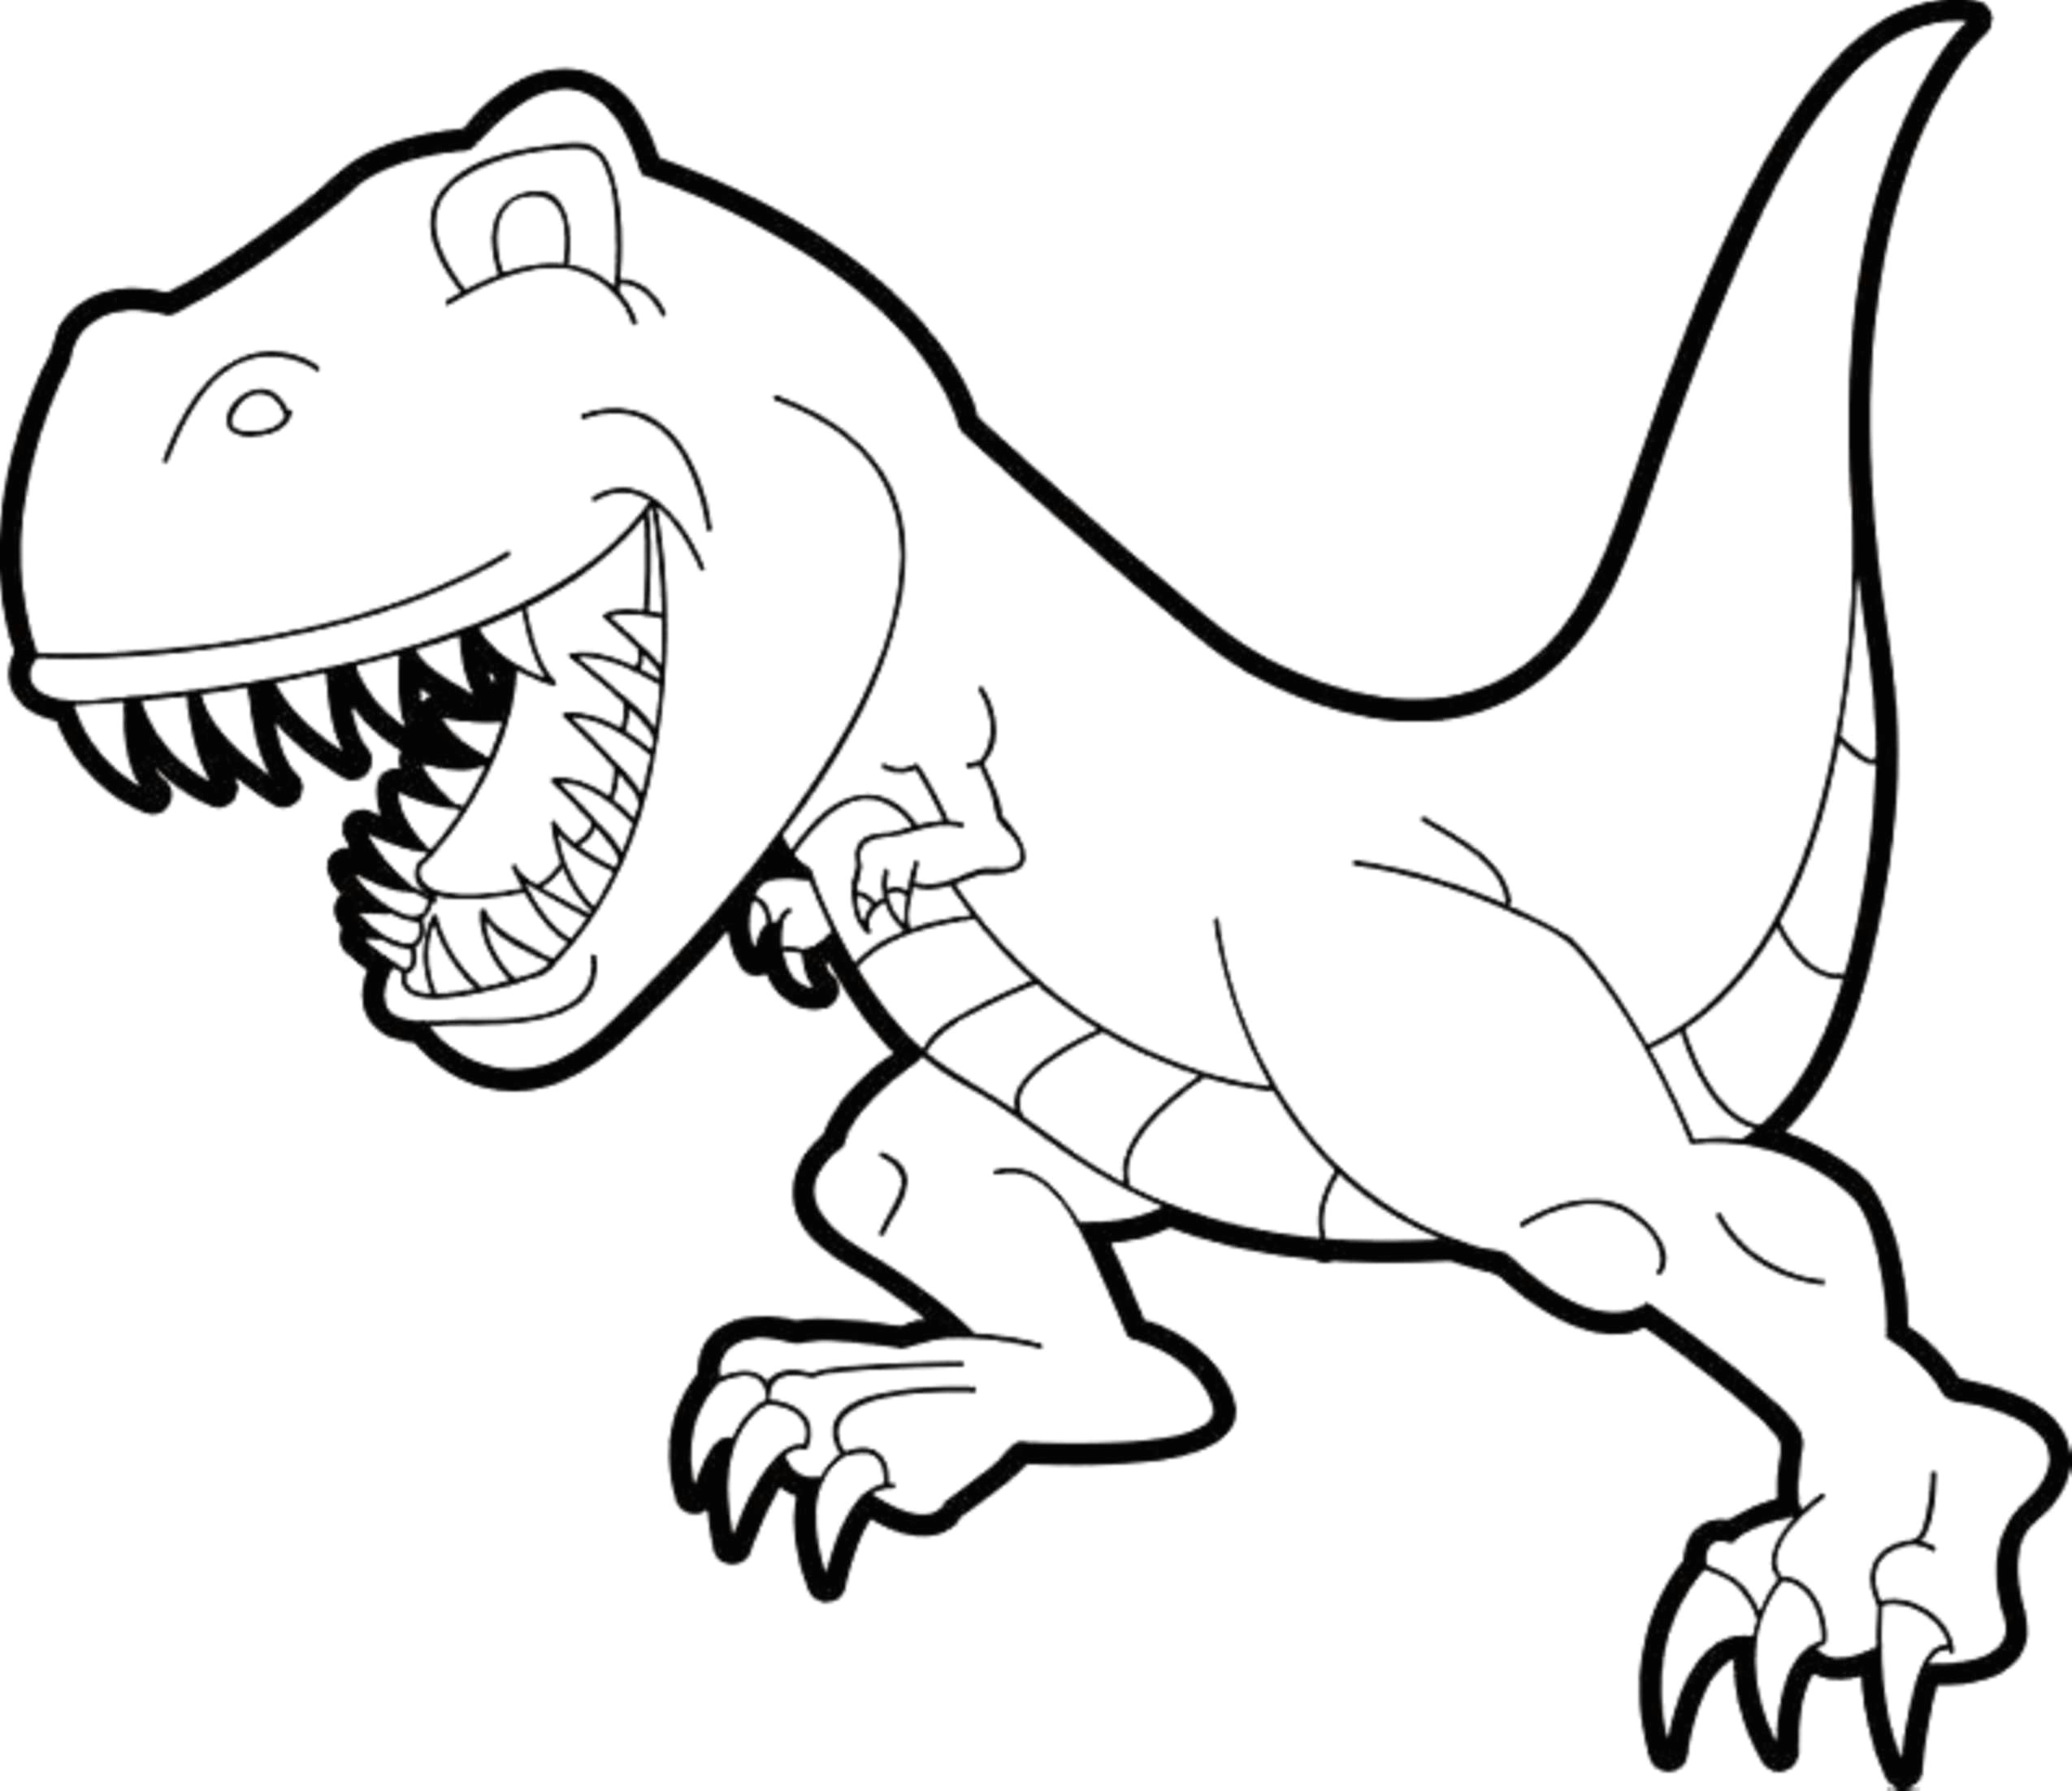 T Rex Drawings Easy Lovely Jurassic World Tyrannosaurus Rex Coloring Pages C Trade Me